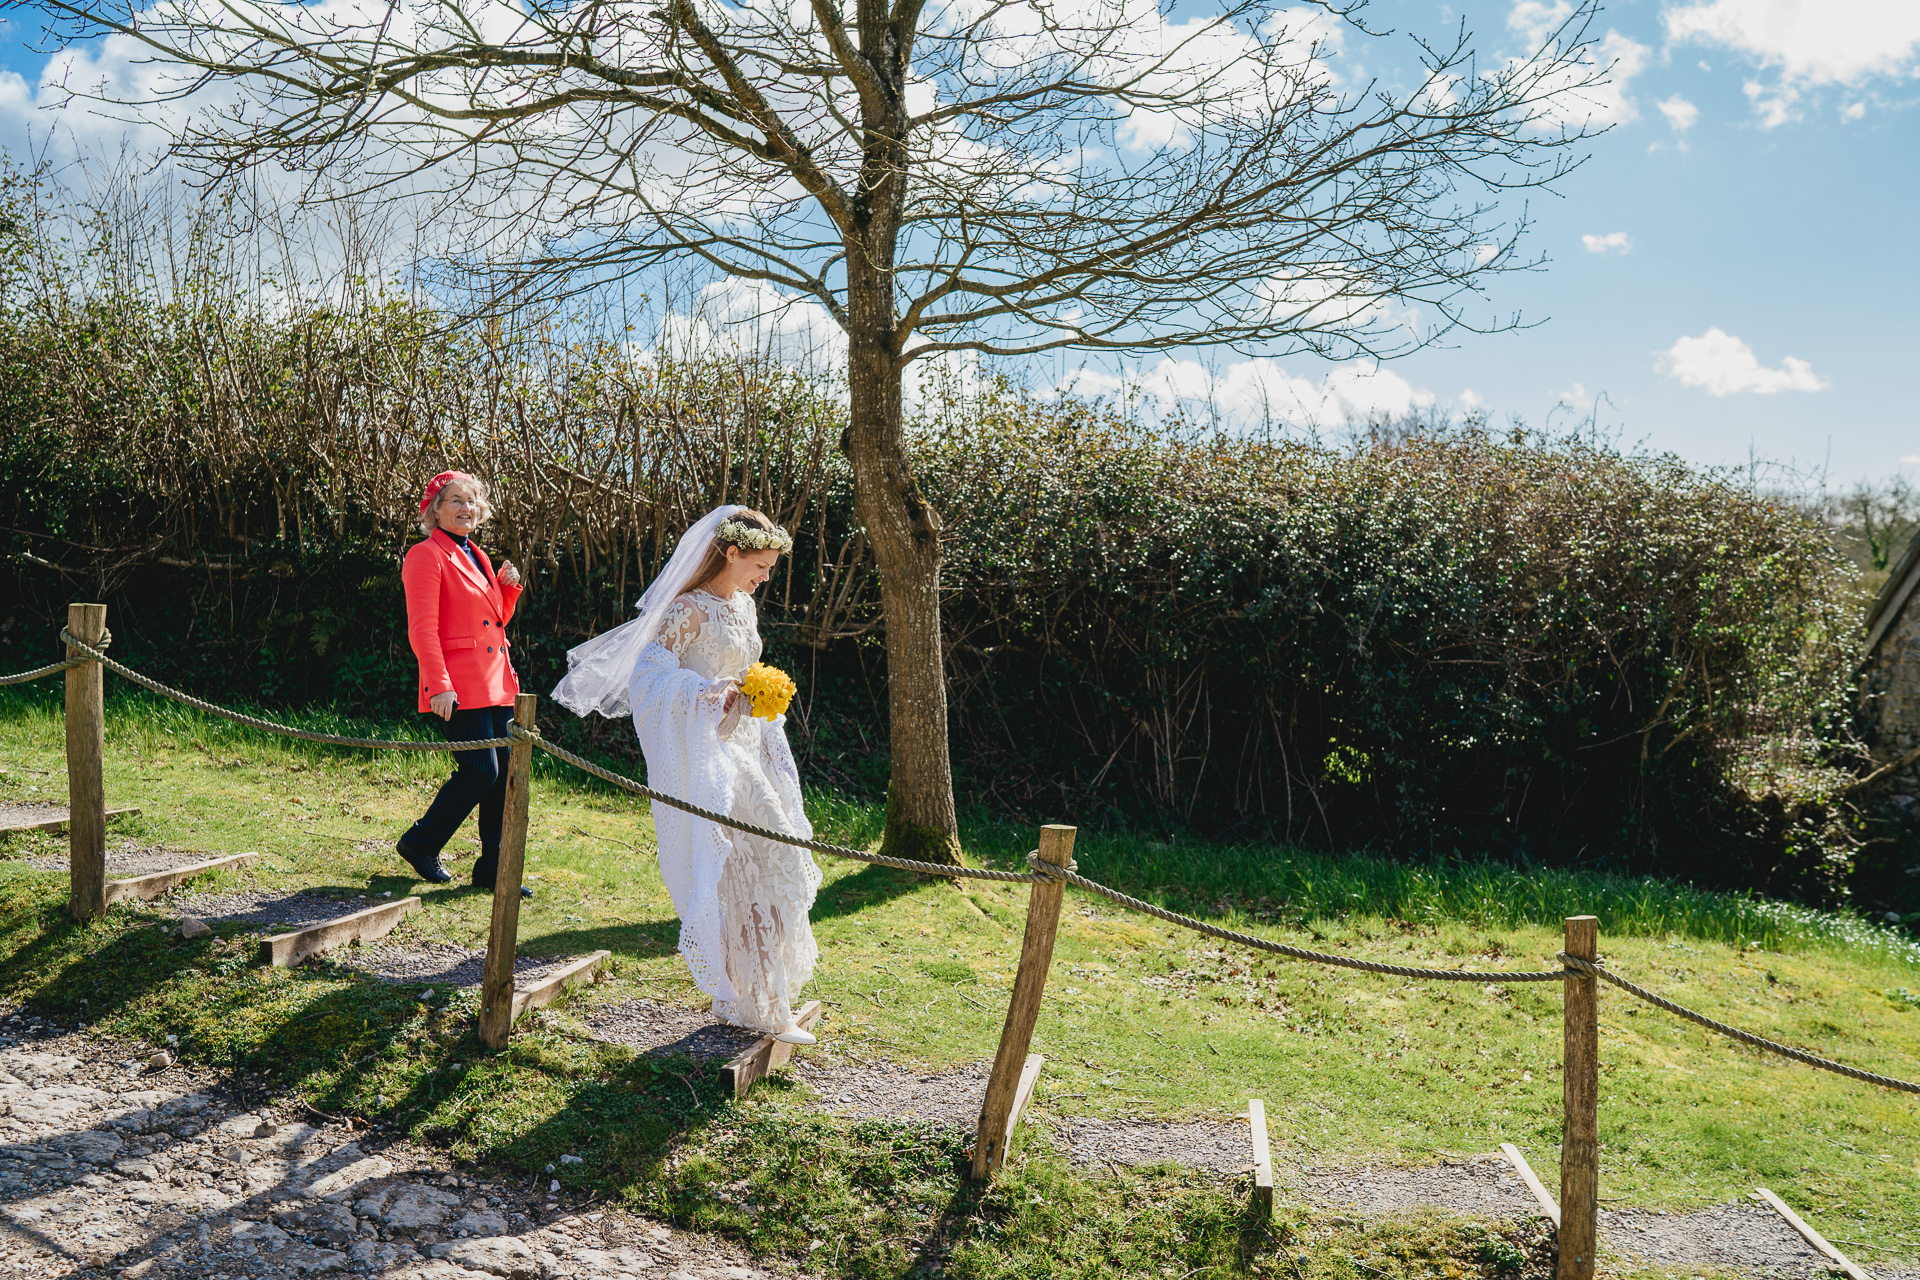 A bride walking down a path in the sunshine